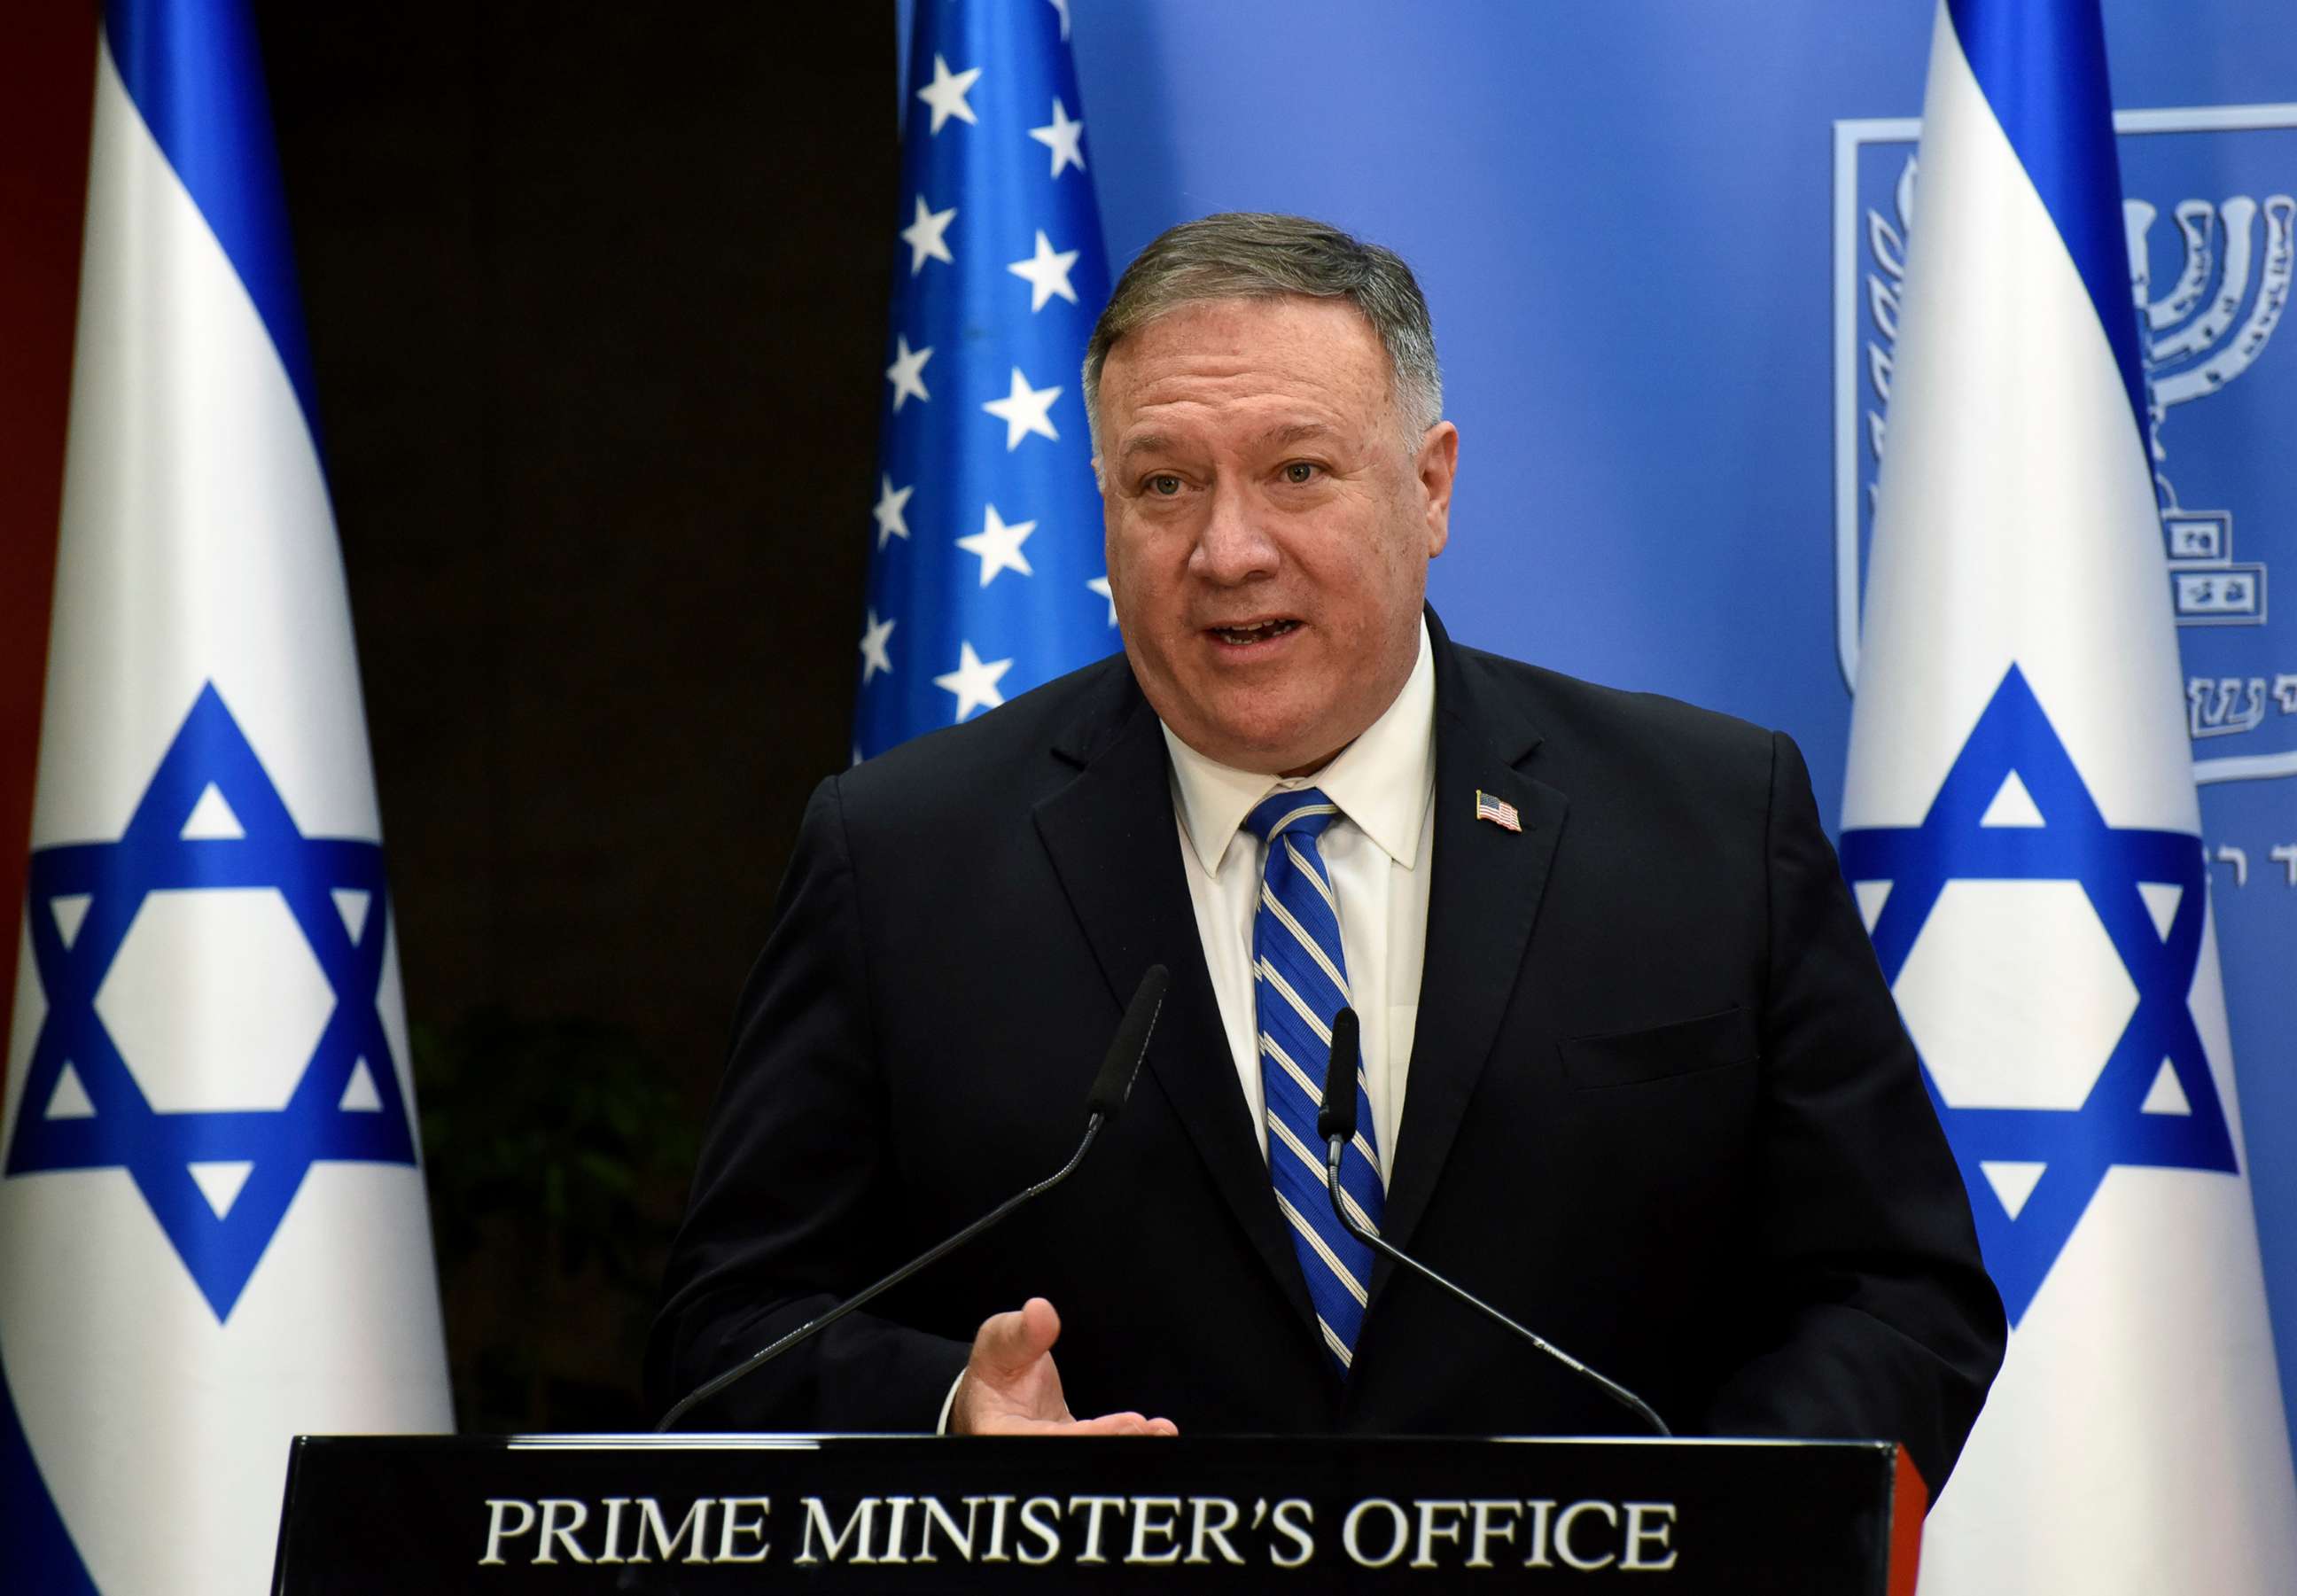 PHOTO: Secretary of State Mike Pompeo speaks during a joint statement to the press with Israeli Prime Minister Benjamin Netanyahu after their meeting, in Jerusalem, Aug. 24, 2020.